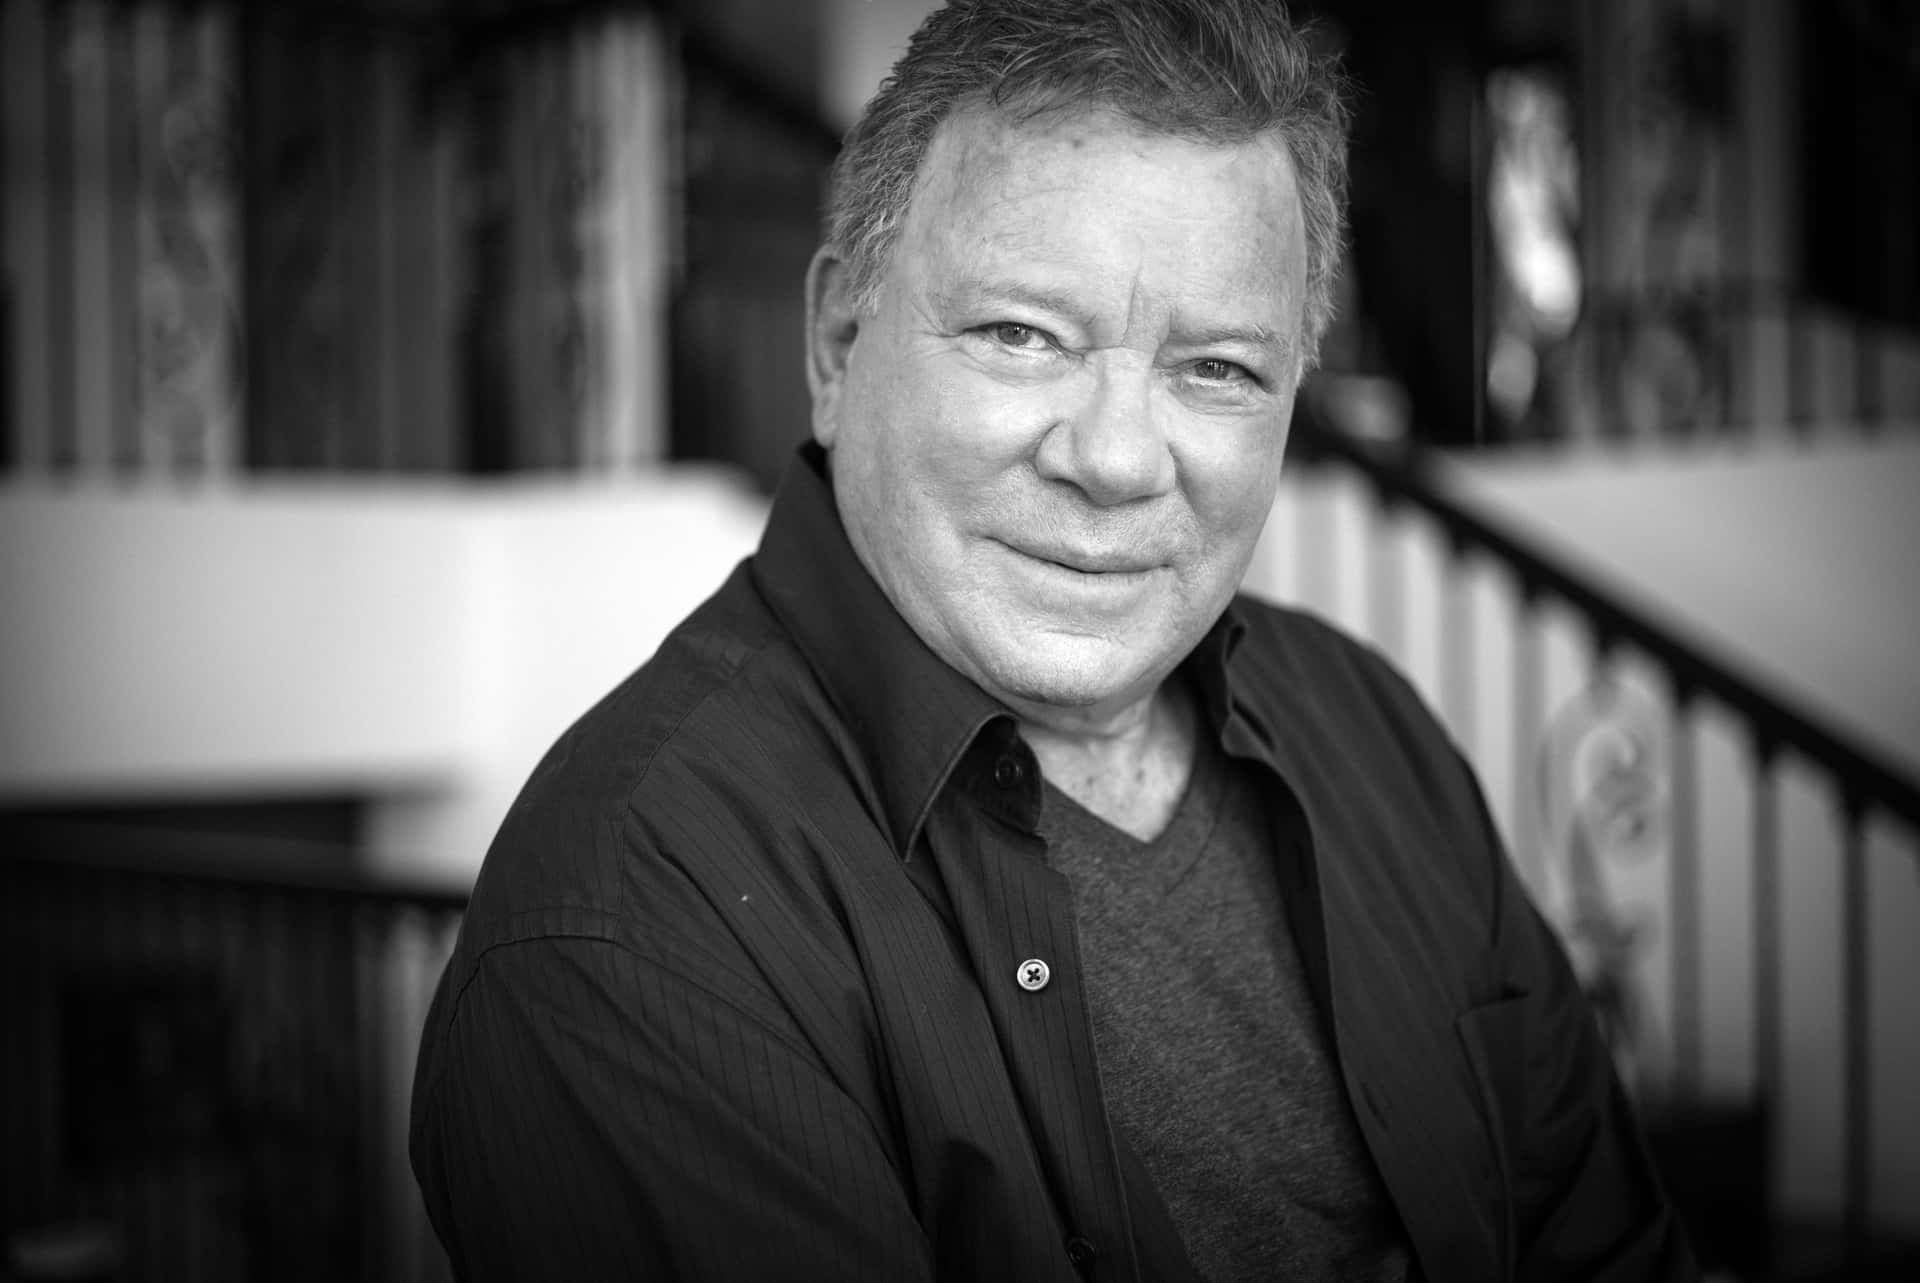 Legendary Hollywood Actor, William Shatner Posing For A Professional Portrait Session.